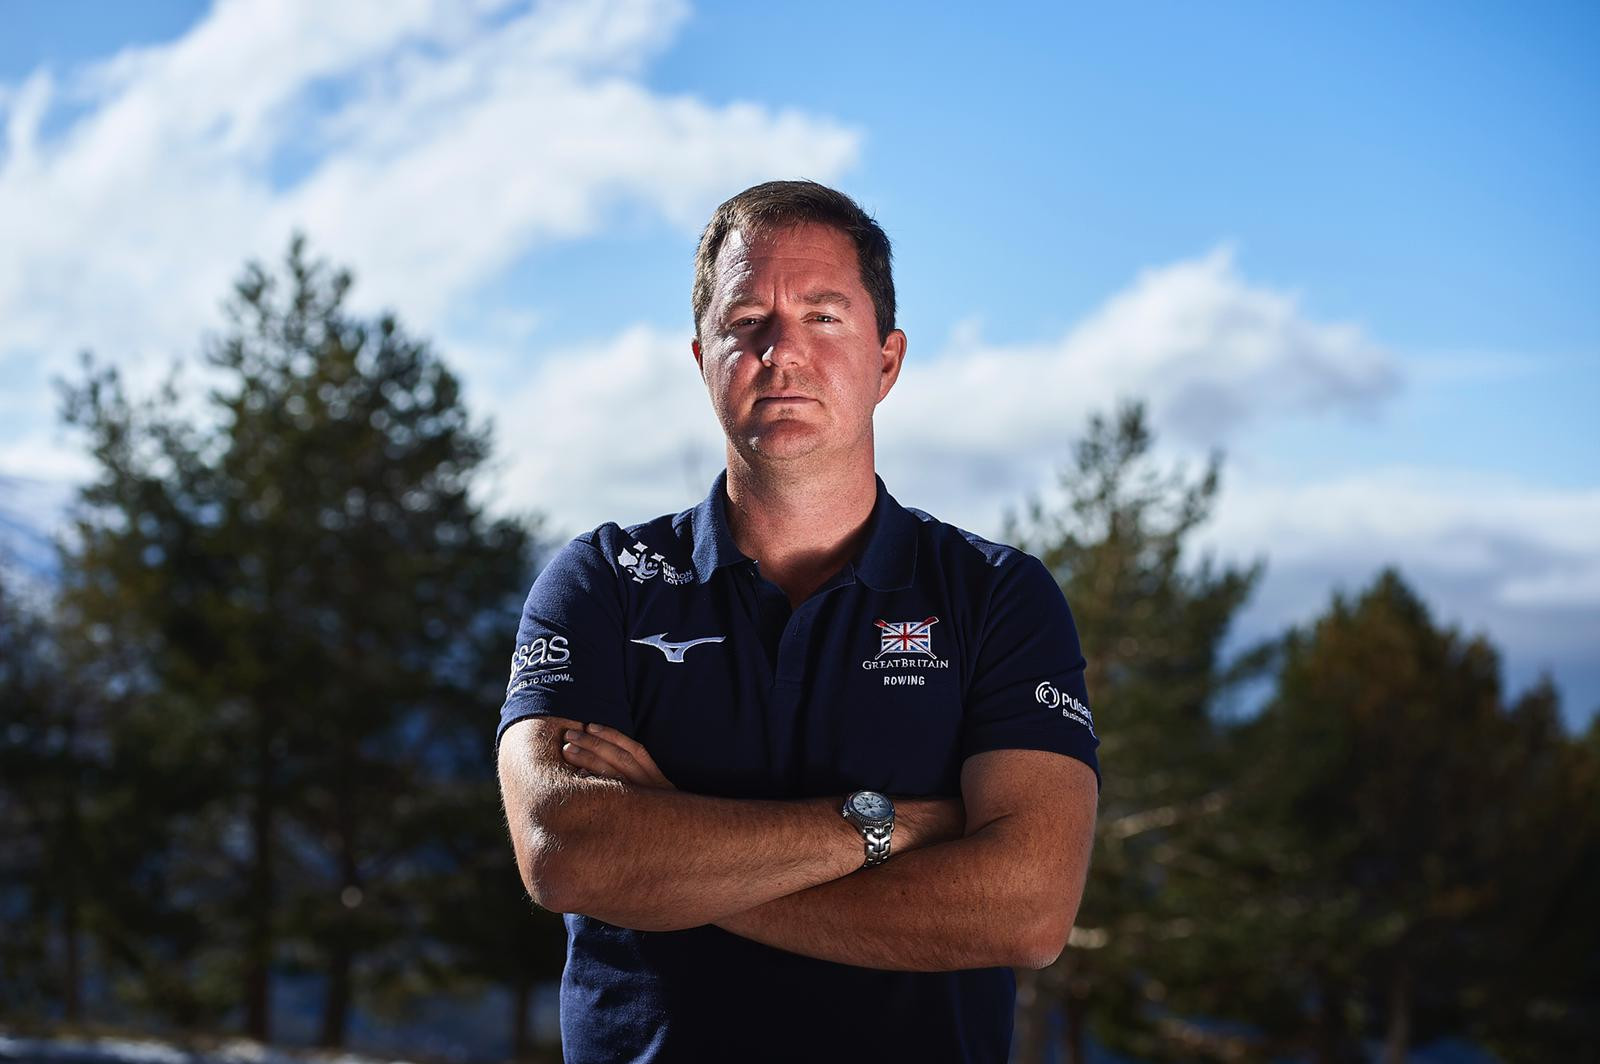 British Rowing appoints Stannard head coach of men's Olympic team